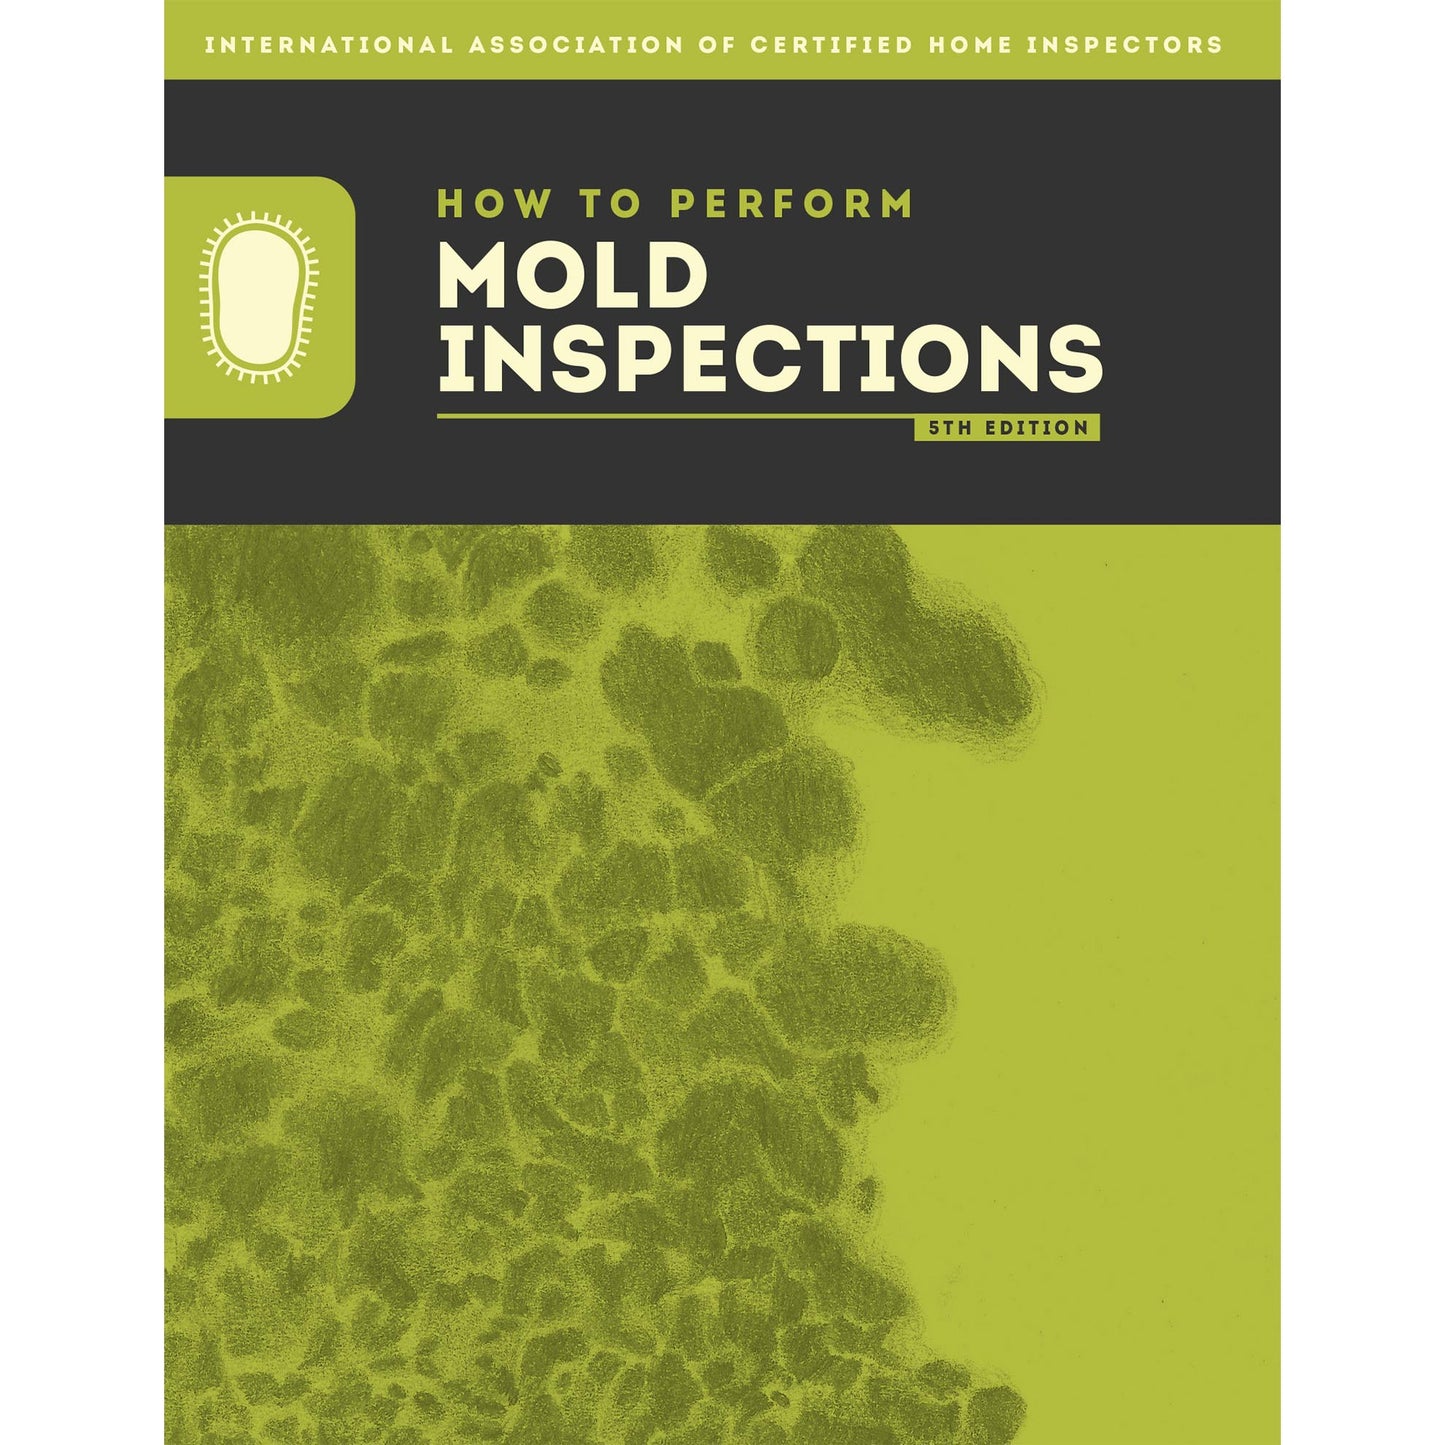 How to Perform Mold Inspections PDF Download